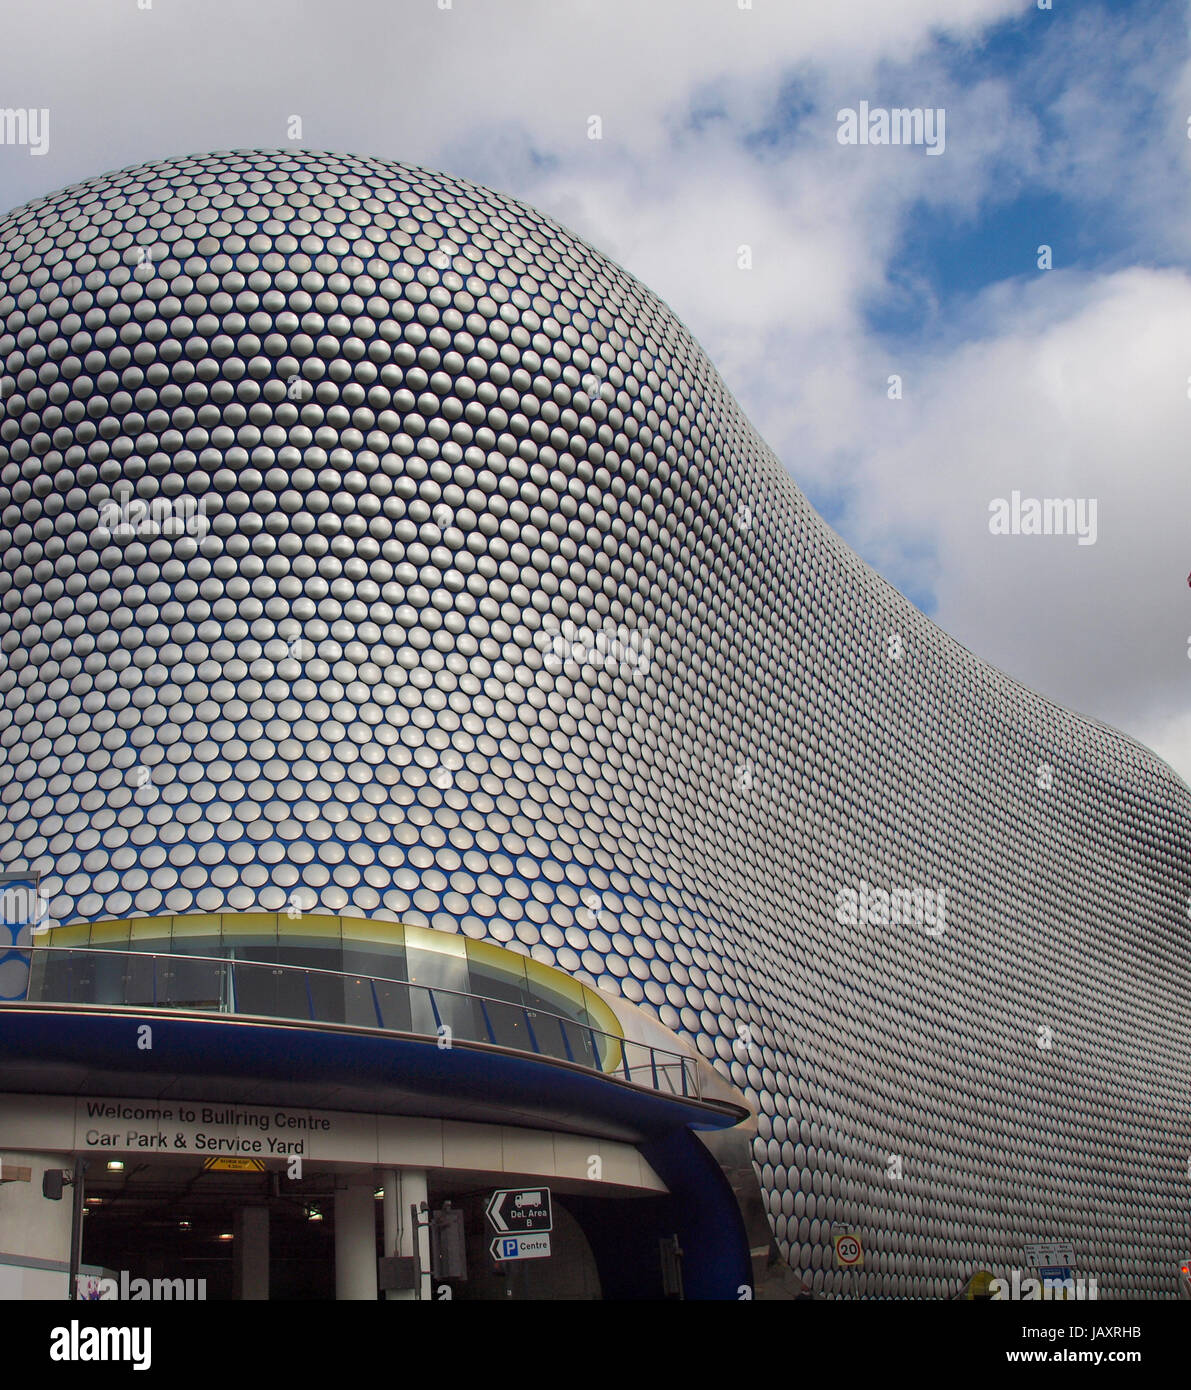 BIRMINGHAM, ENGLAND, UK - SEPTEMBER 23, 2011: The new Bull Ring shopping centre was designed by Future Systems architects for Selfridges, following an organic form inspired by the Fibonacci sequence Stock Photo